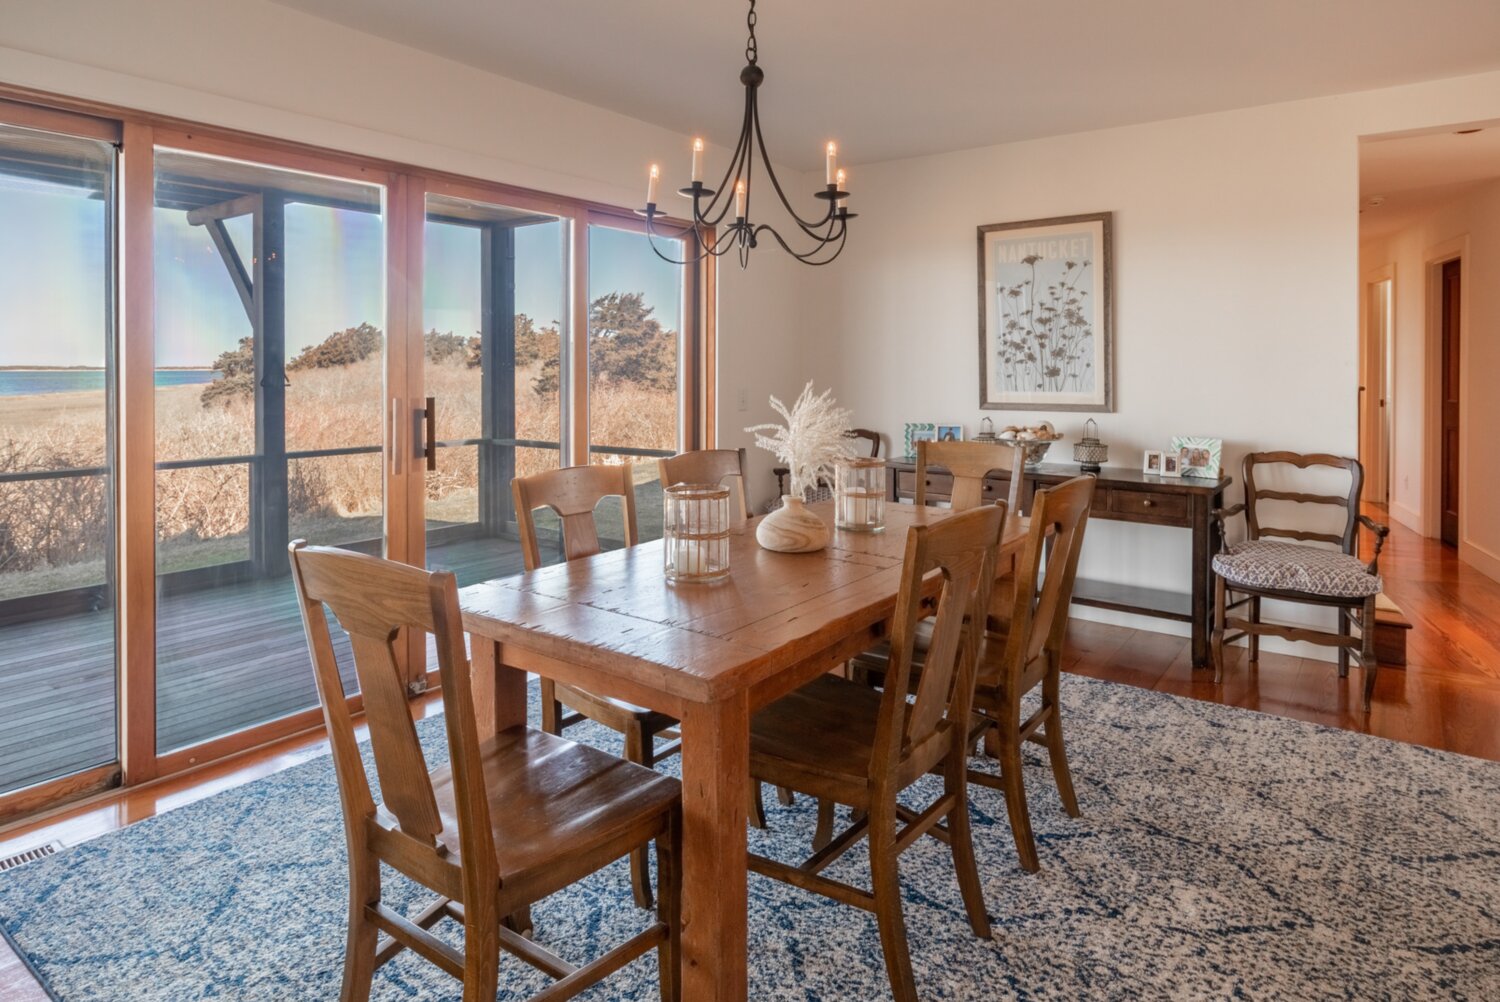 The dining room overlooks the screened-in porch.